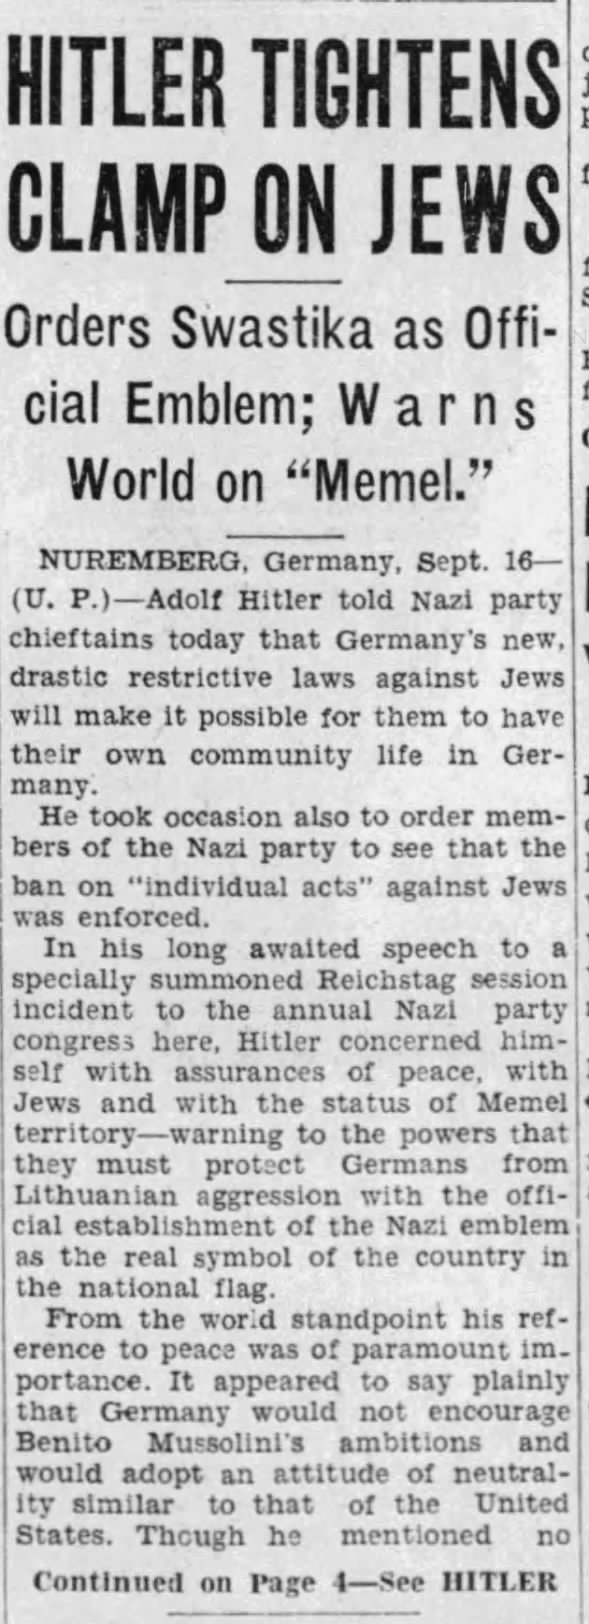 Hitler Tightens Clamp On Jews